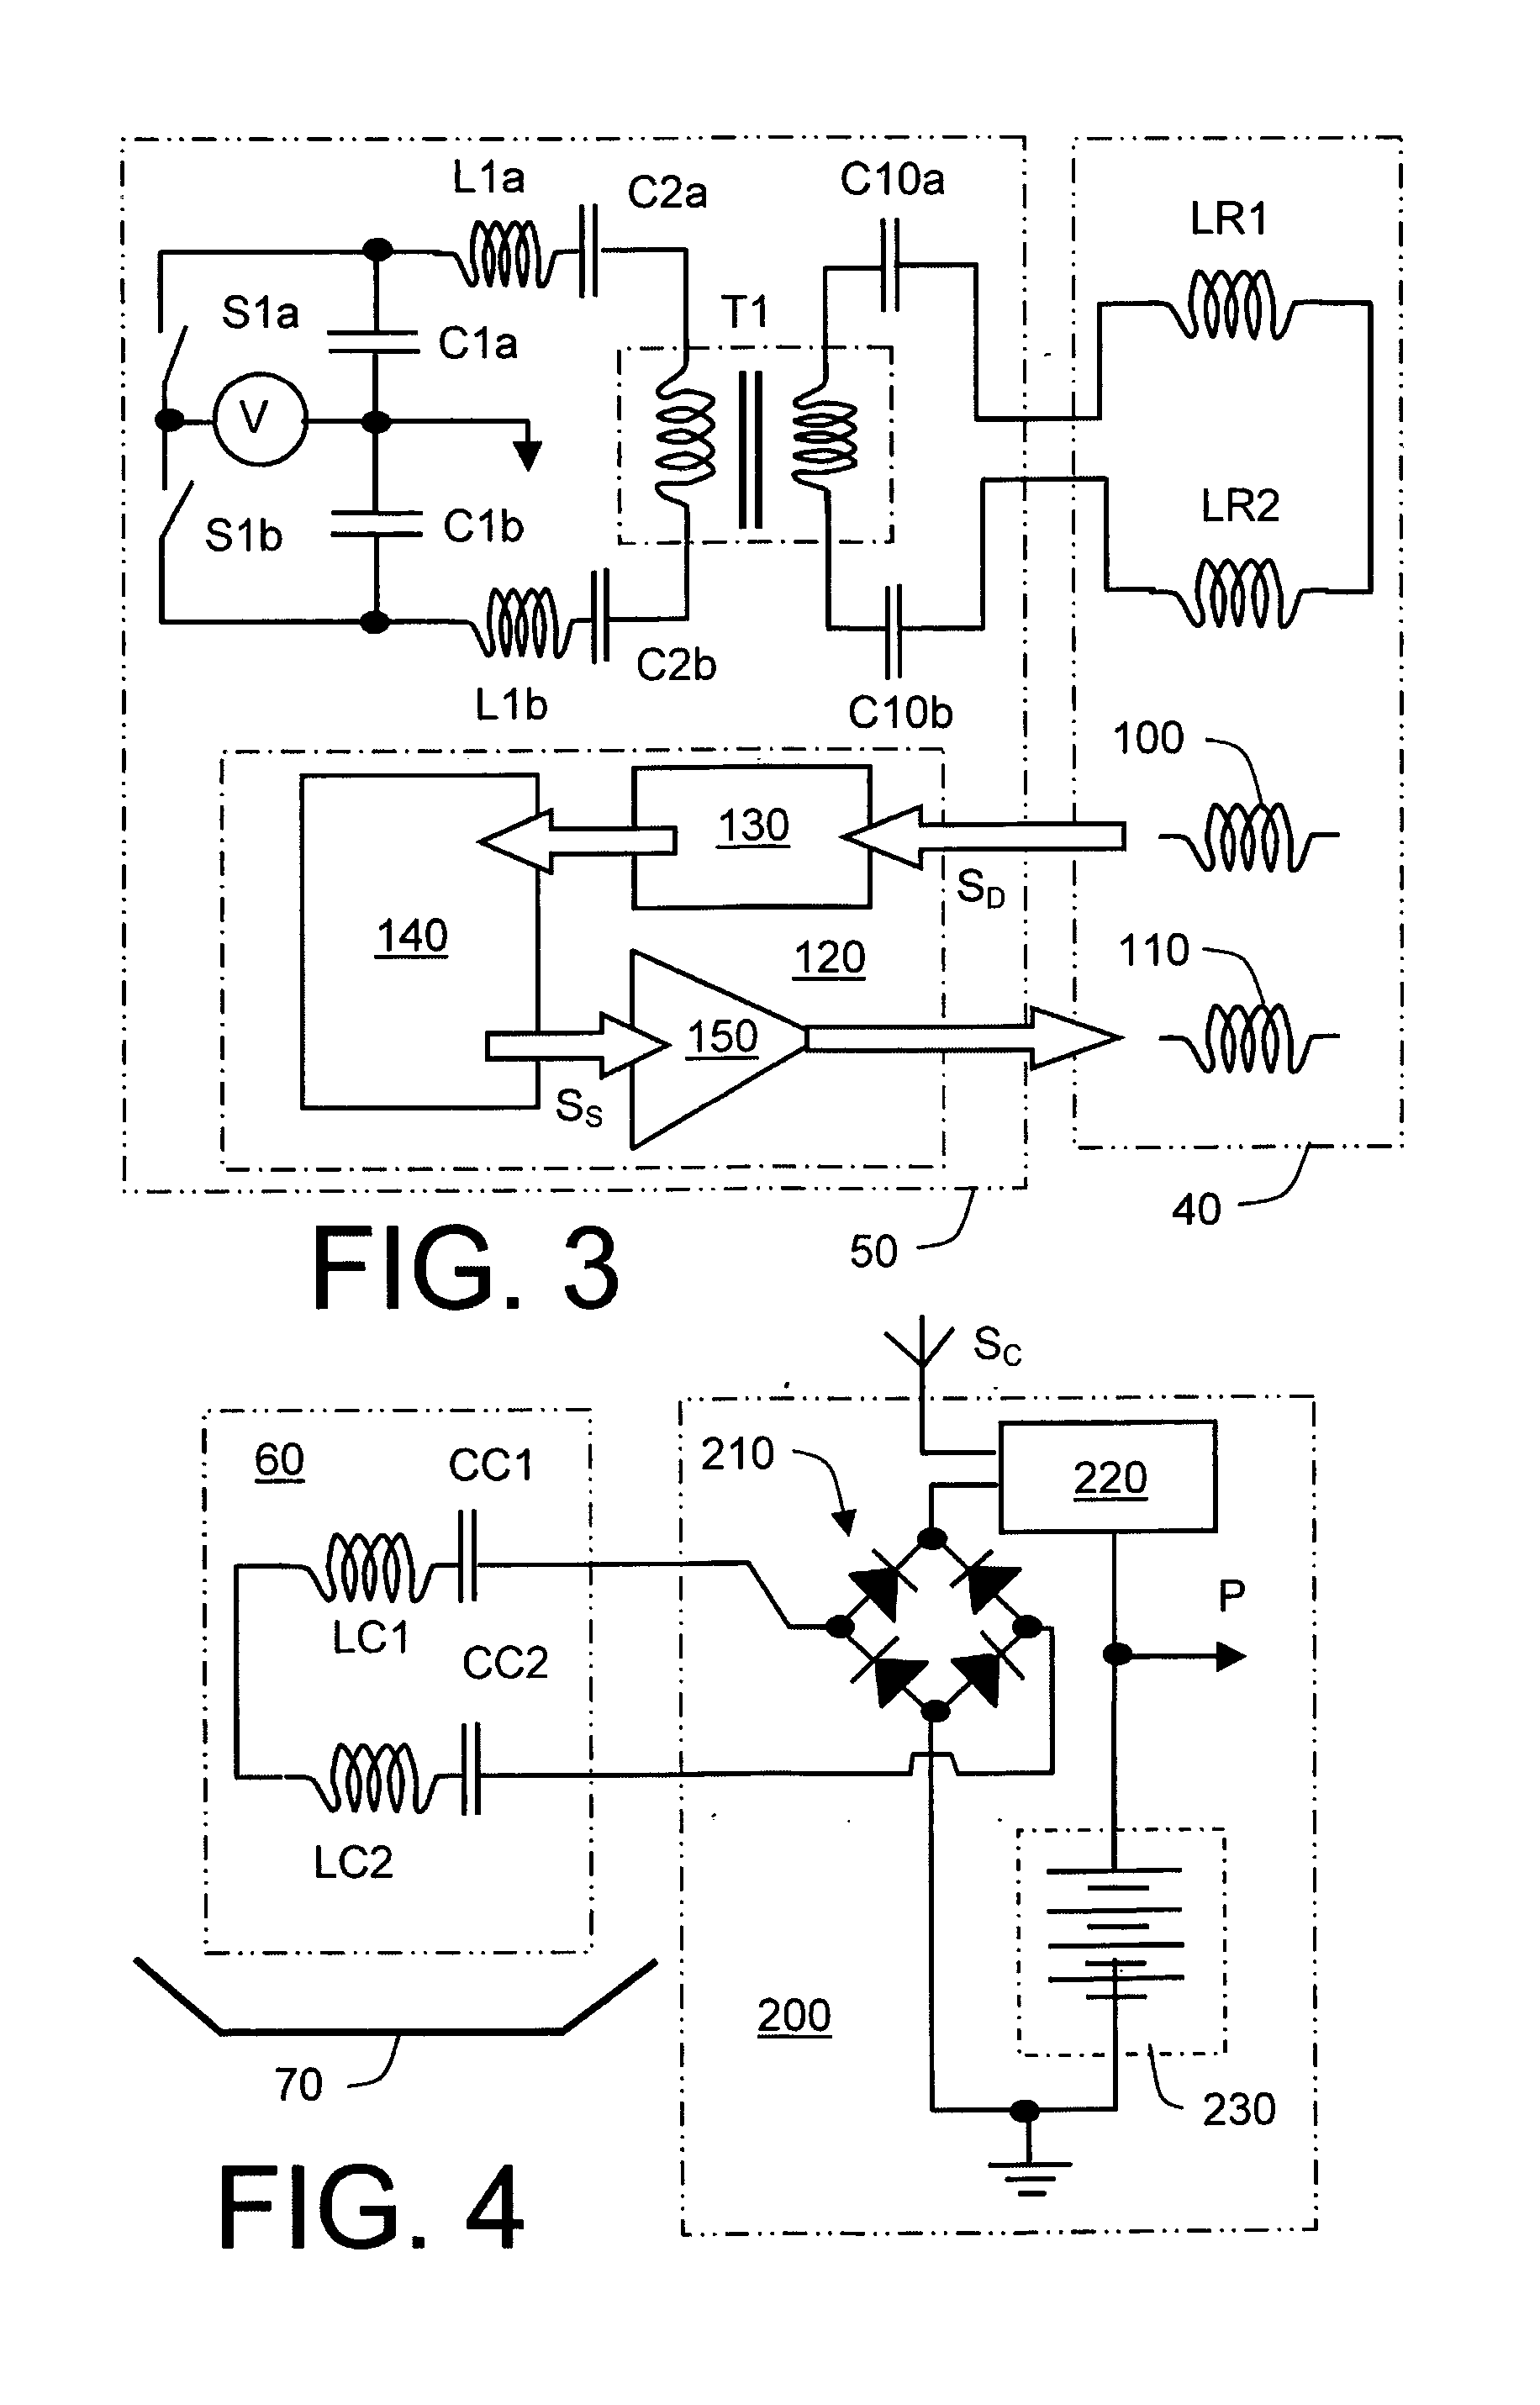 Inductive power coupling systems for roadways